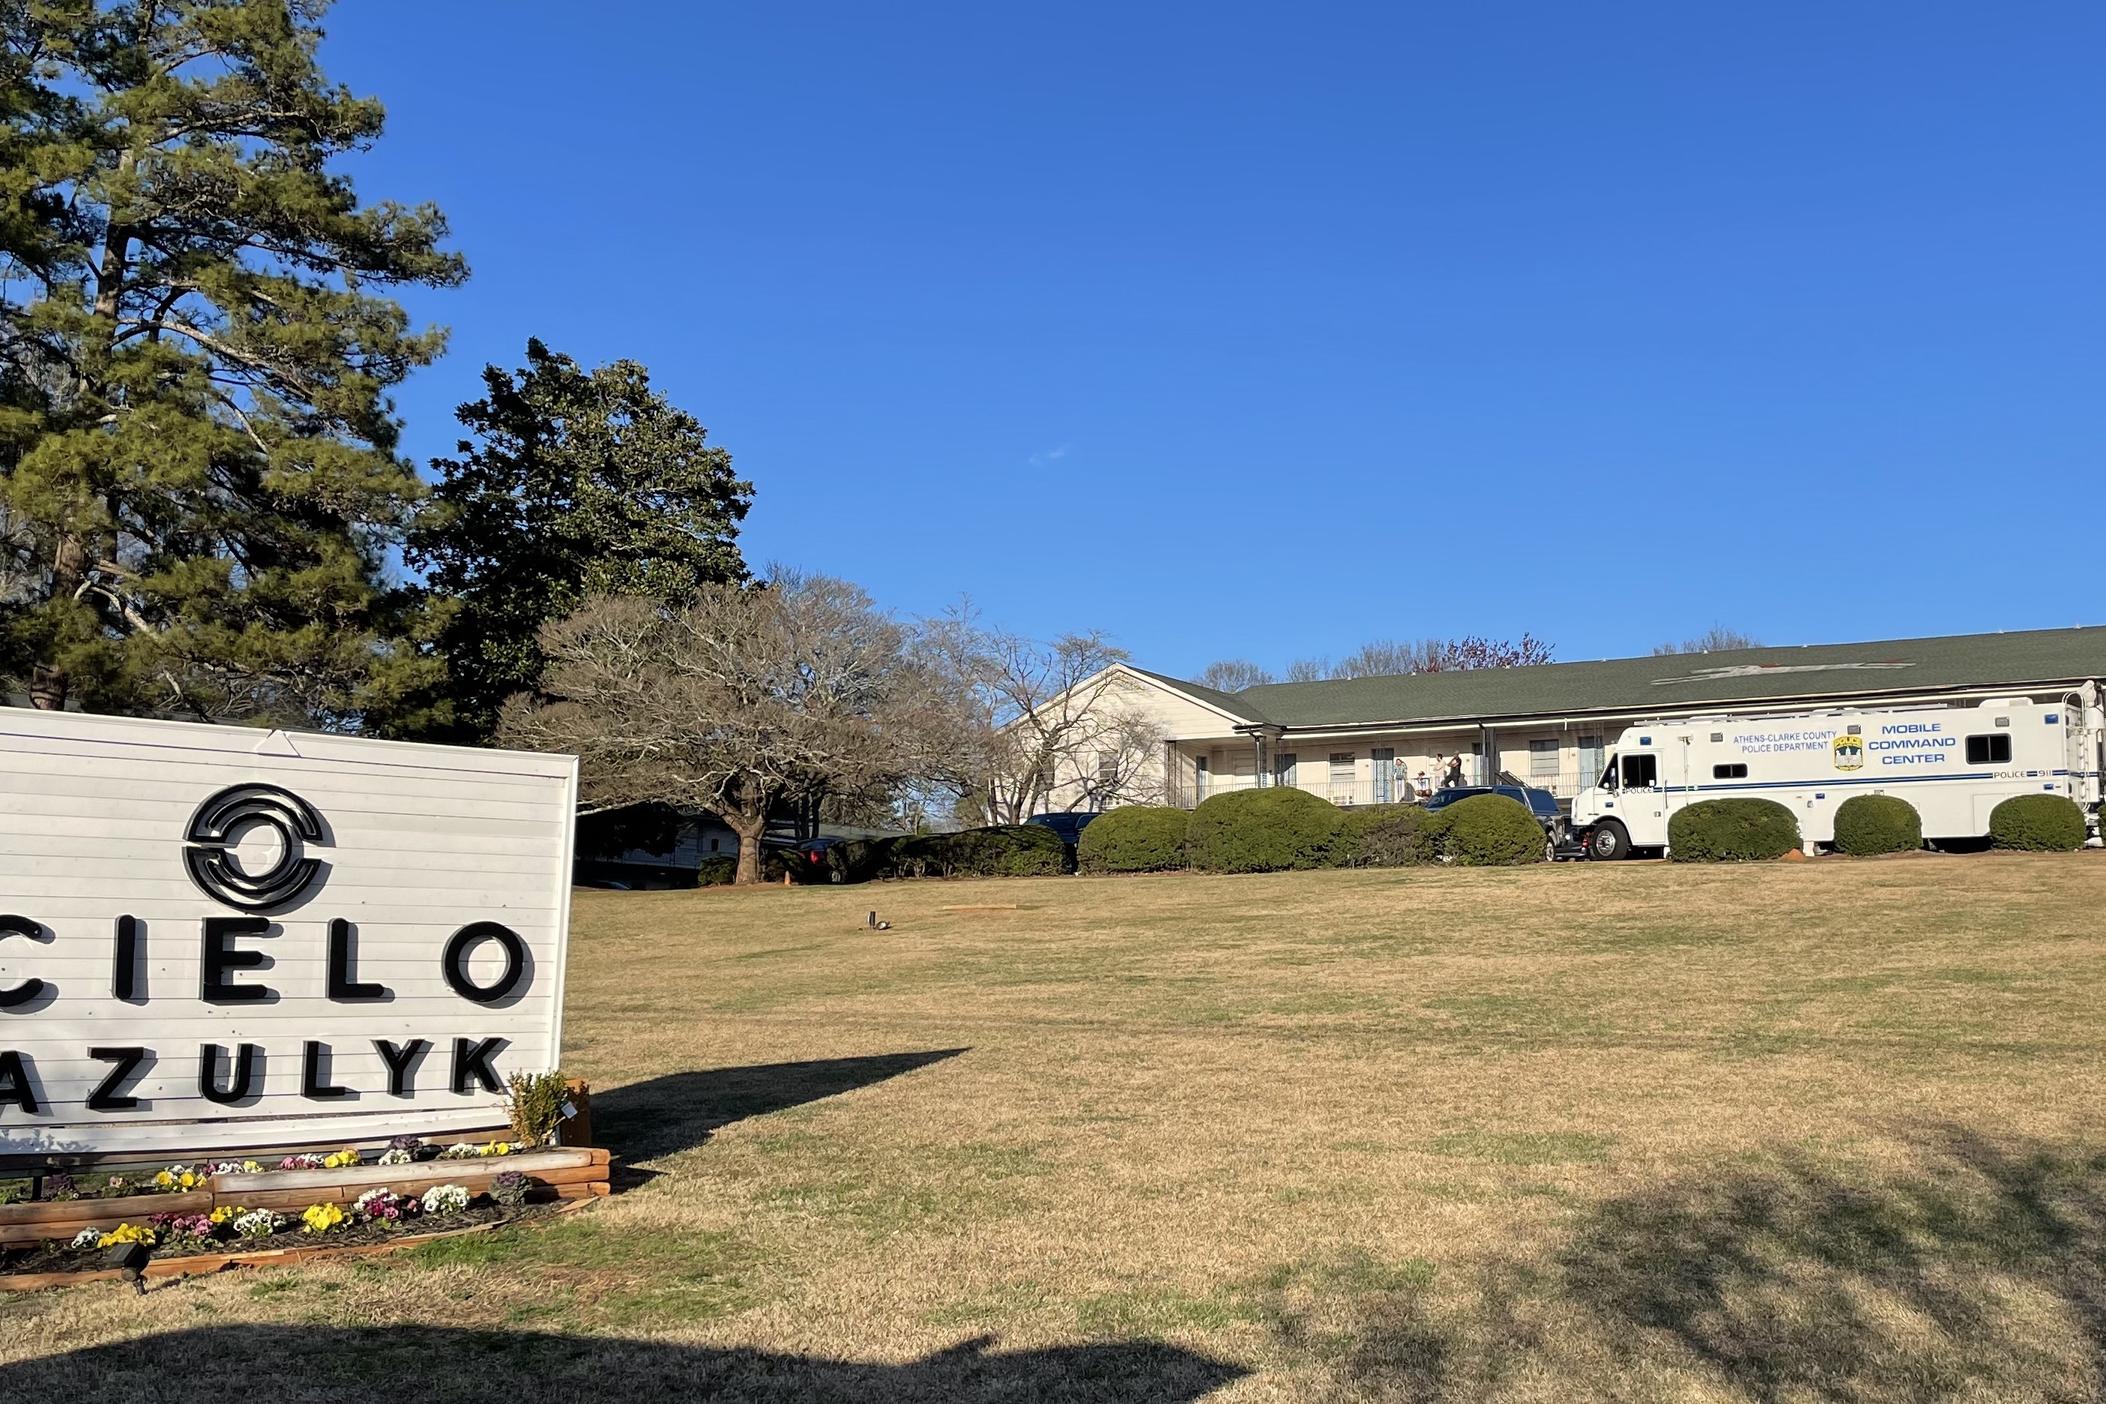 On Friday, Feb. 23, 2024, Athens-Clarke County Police searched Cielo Azulyk, an apartment complex in Athens, Ga., for evidence connecting suspect Jose Antonio Ibarra to the Thursday murder of Laken Riley, an area nursing student. 